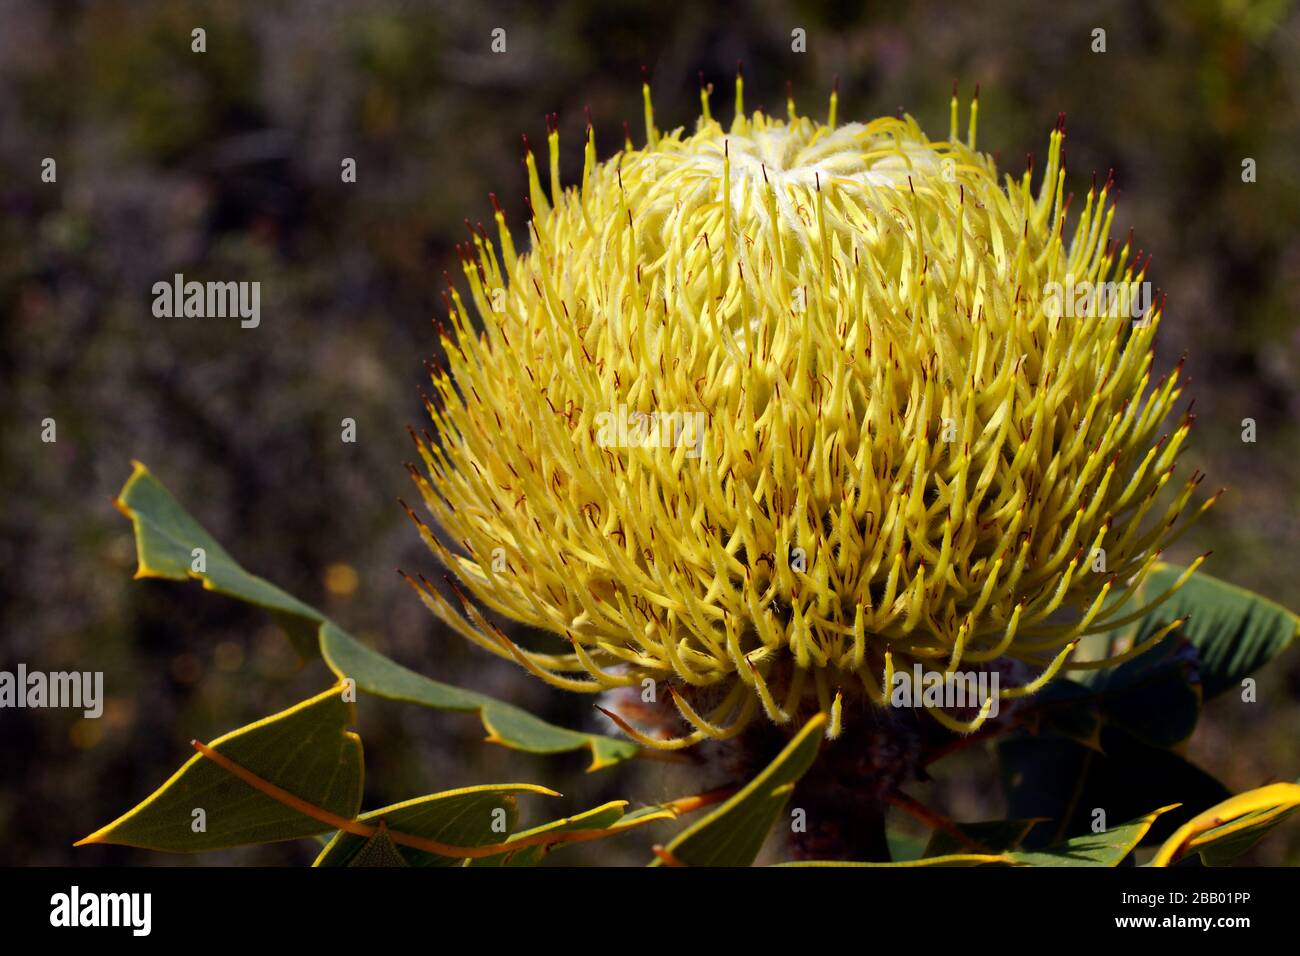 Yellow flower of the birds-nest Banksia, Banksia baxteri, in its natural habitat in South West Western Australia Stock Photo